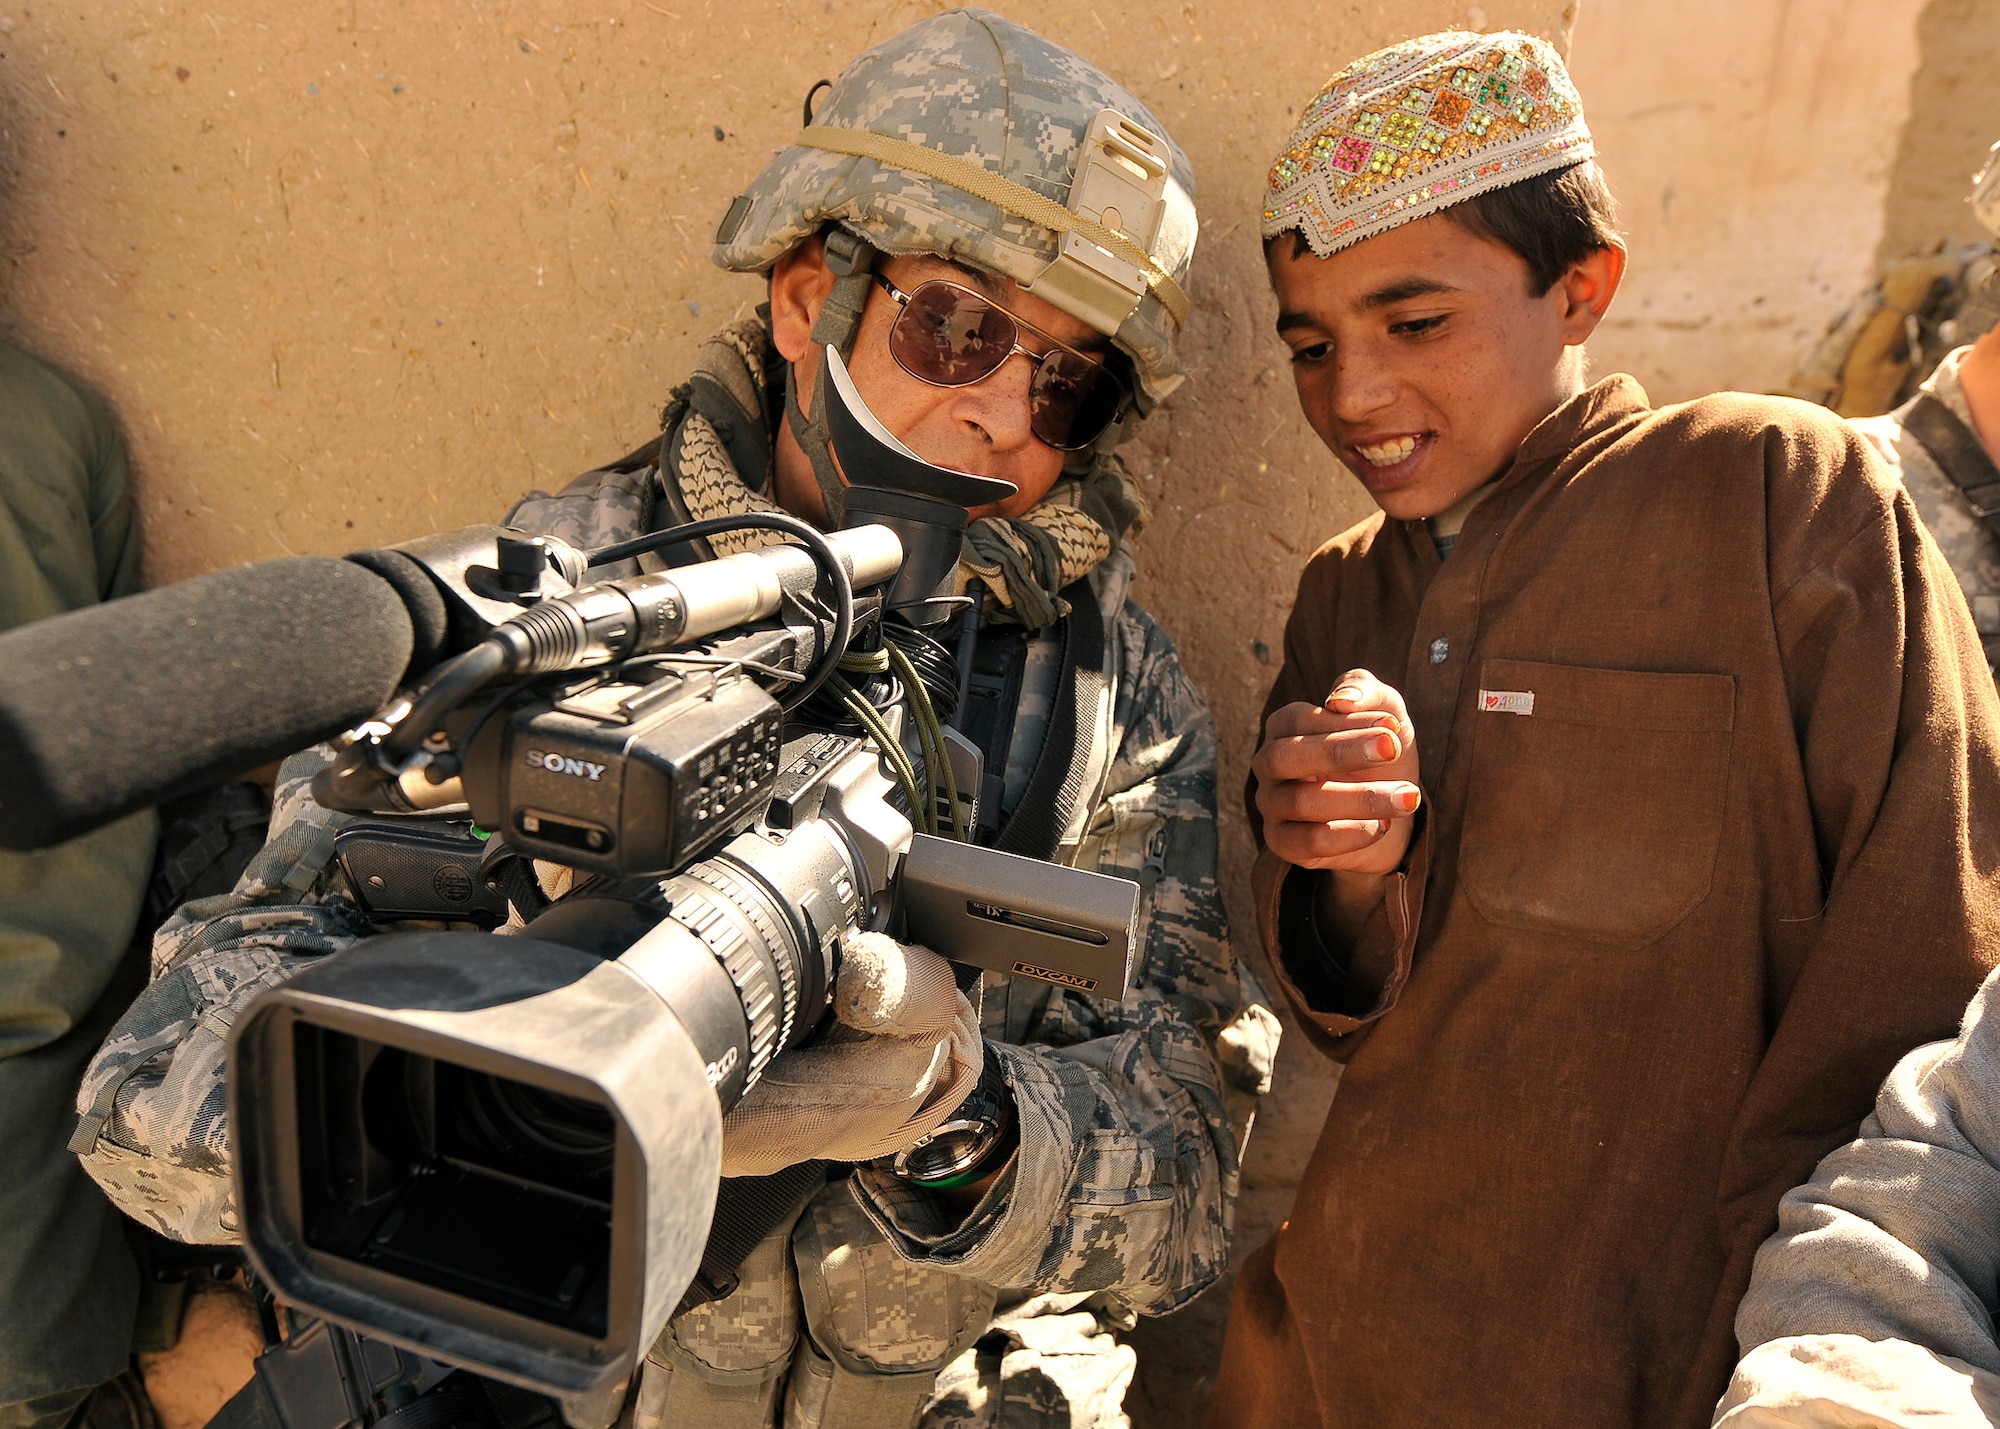 Master Sgt. Robert Carreon shows an Afghan student his footage Jan. 7, 2010, at the Bazaar school in Hutal, Afghanistan. Sergeant Carreon is a videographer with 4th Combat Camera and was attached to the 5th Brigade, 2nd Infantry Division. (U.S. Air Force photo/Staff Sgt. Dayton Mitchell) 